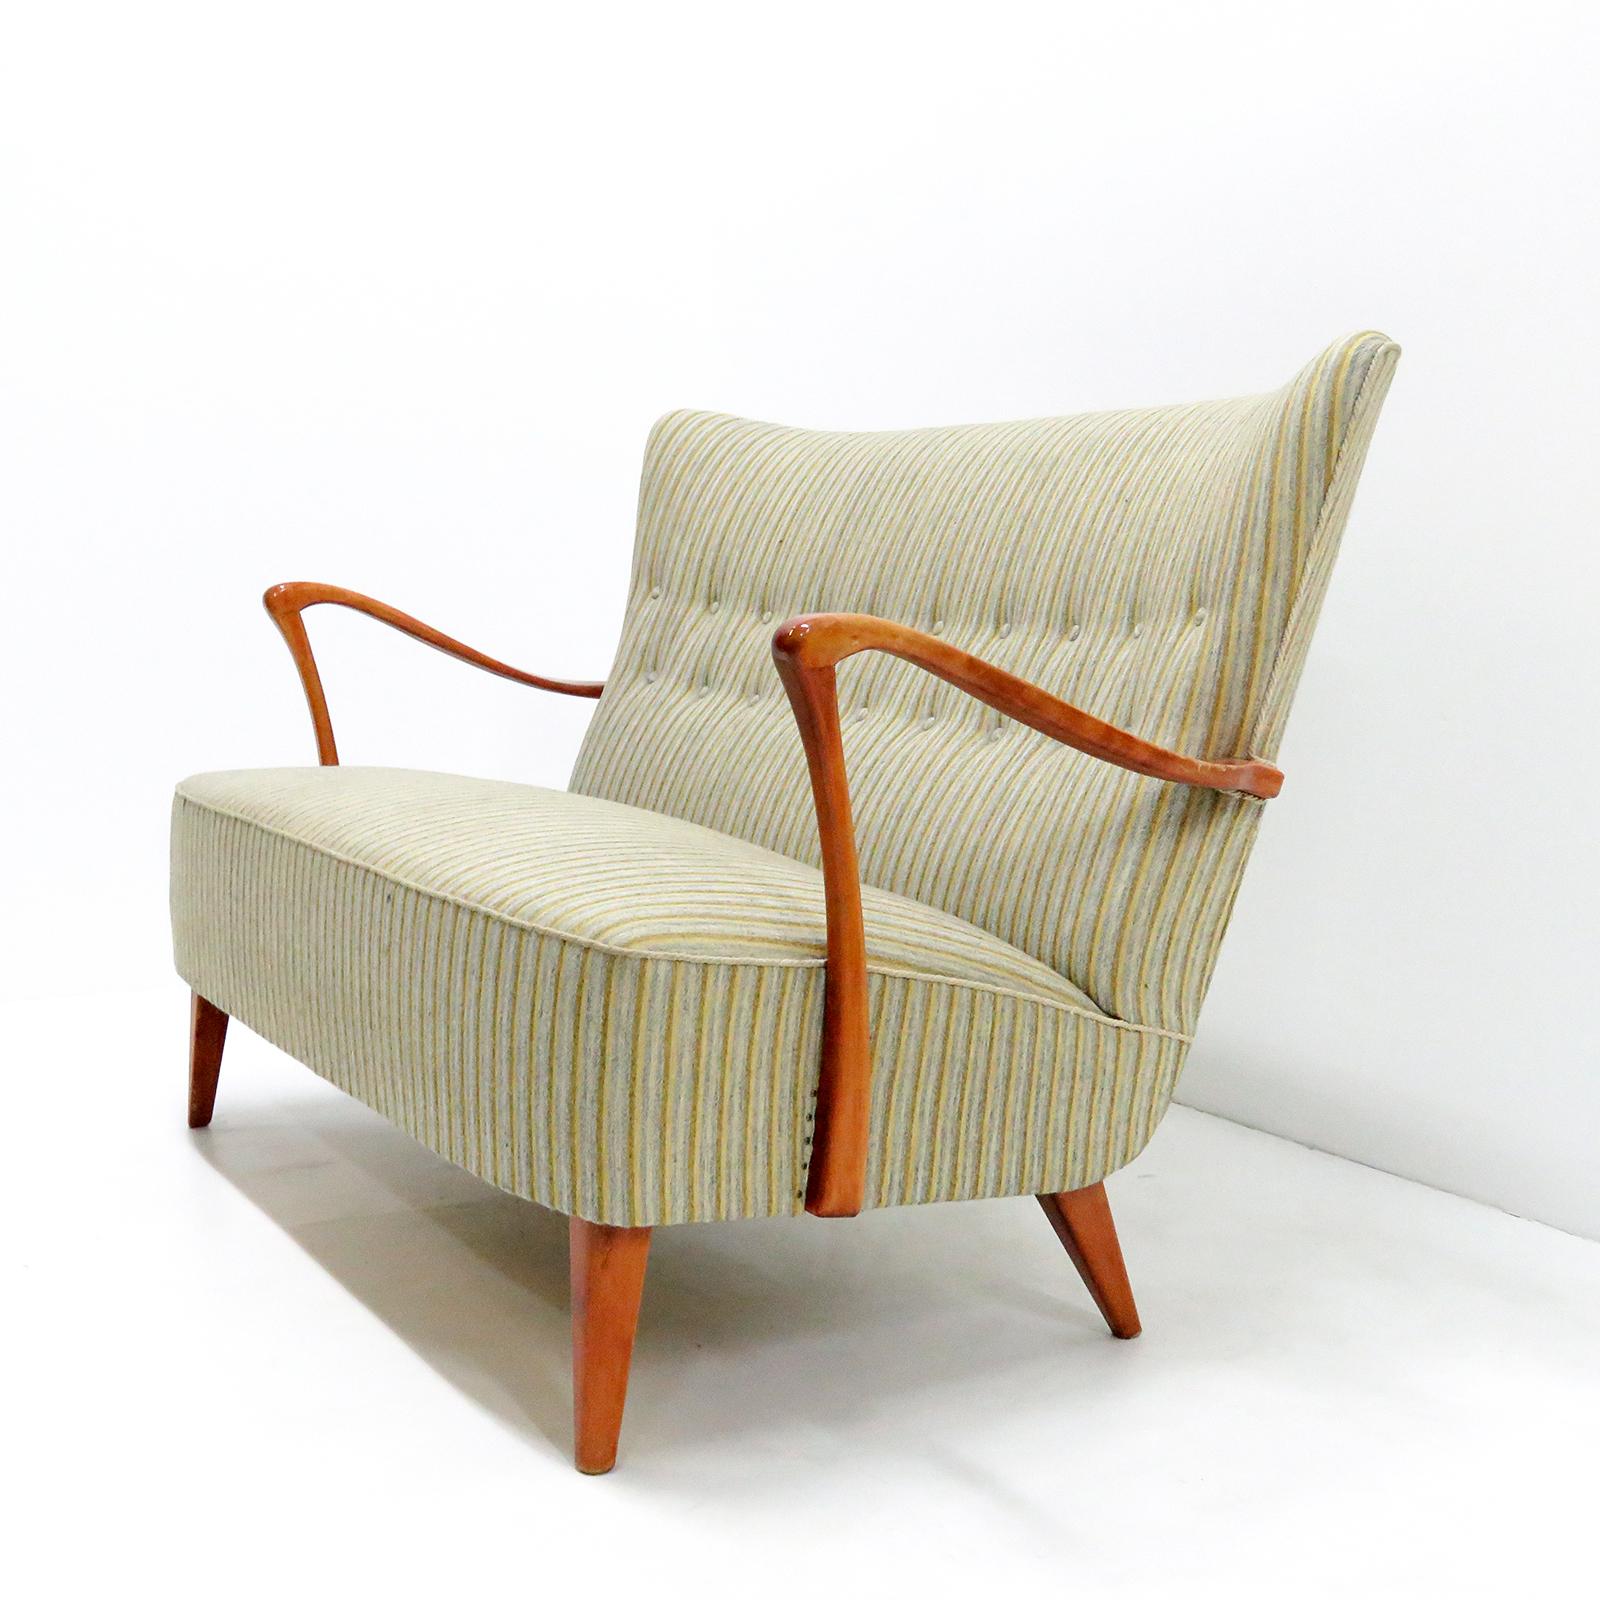 Stained Danish Modern Sofa by DUX, 1940